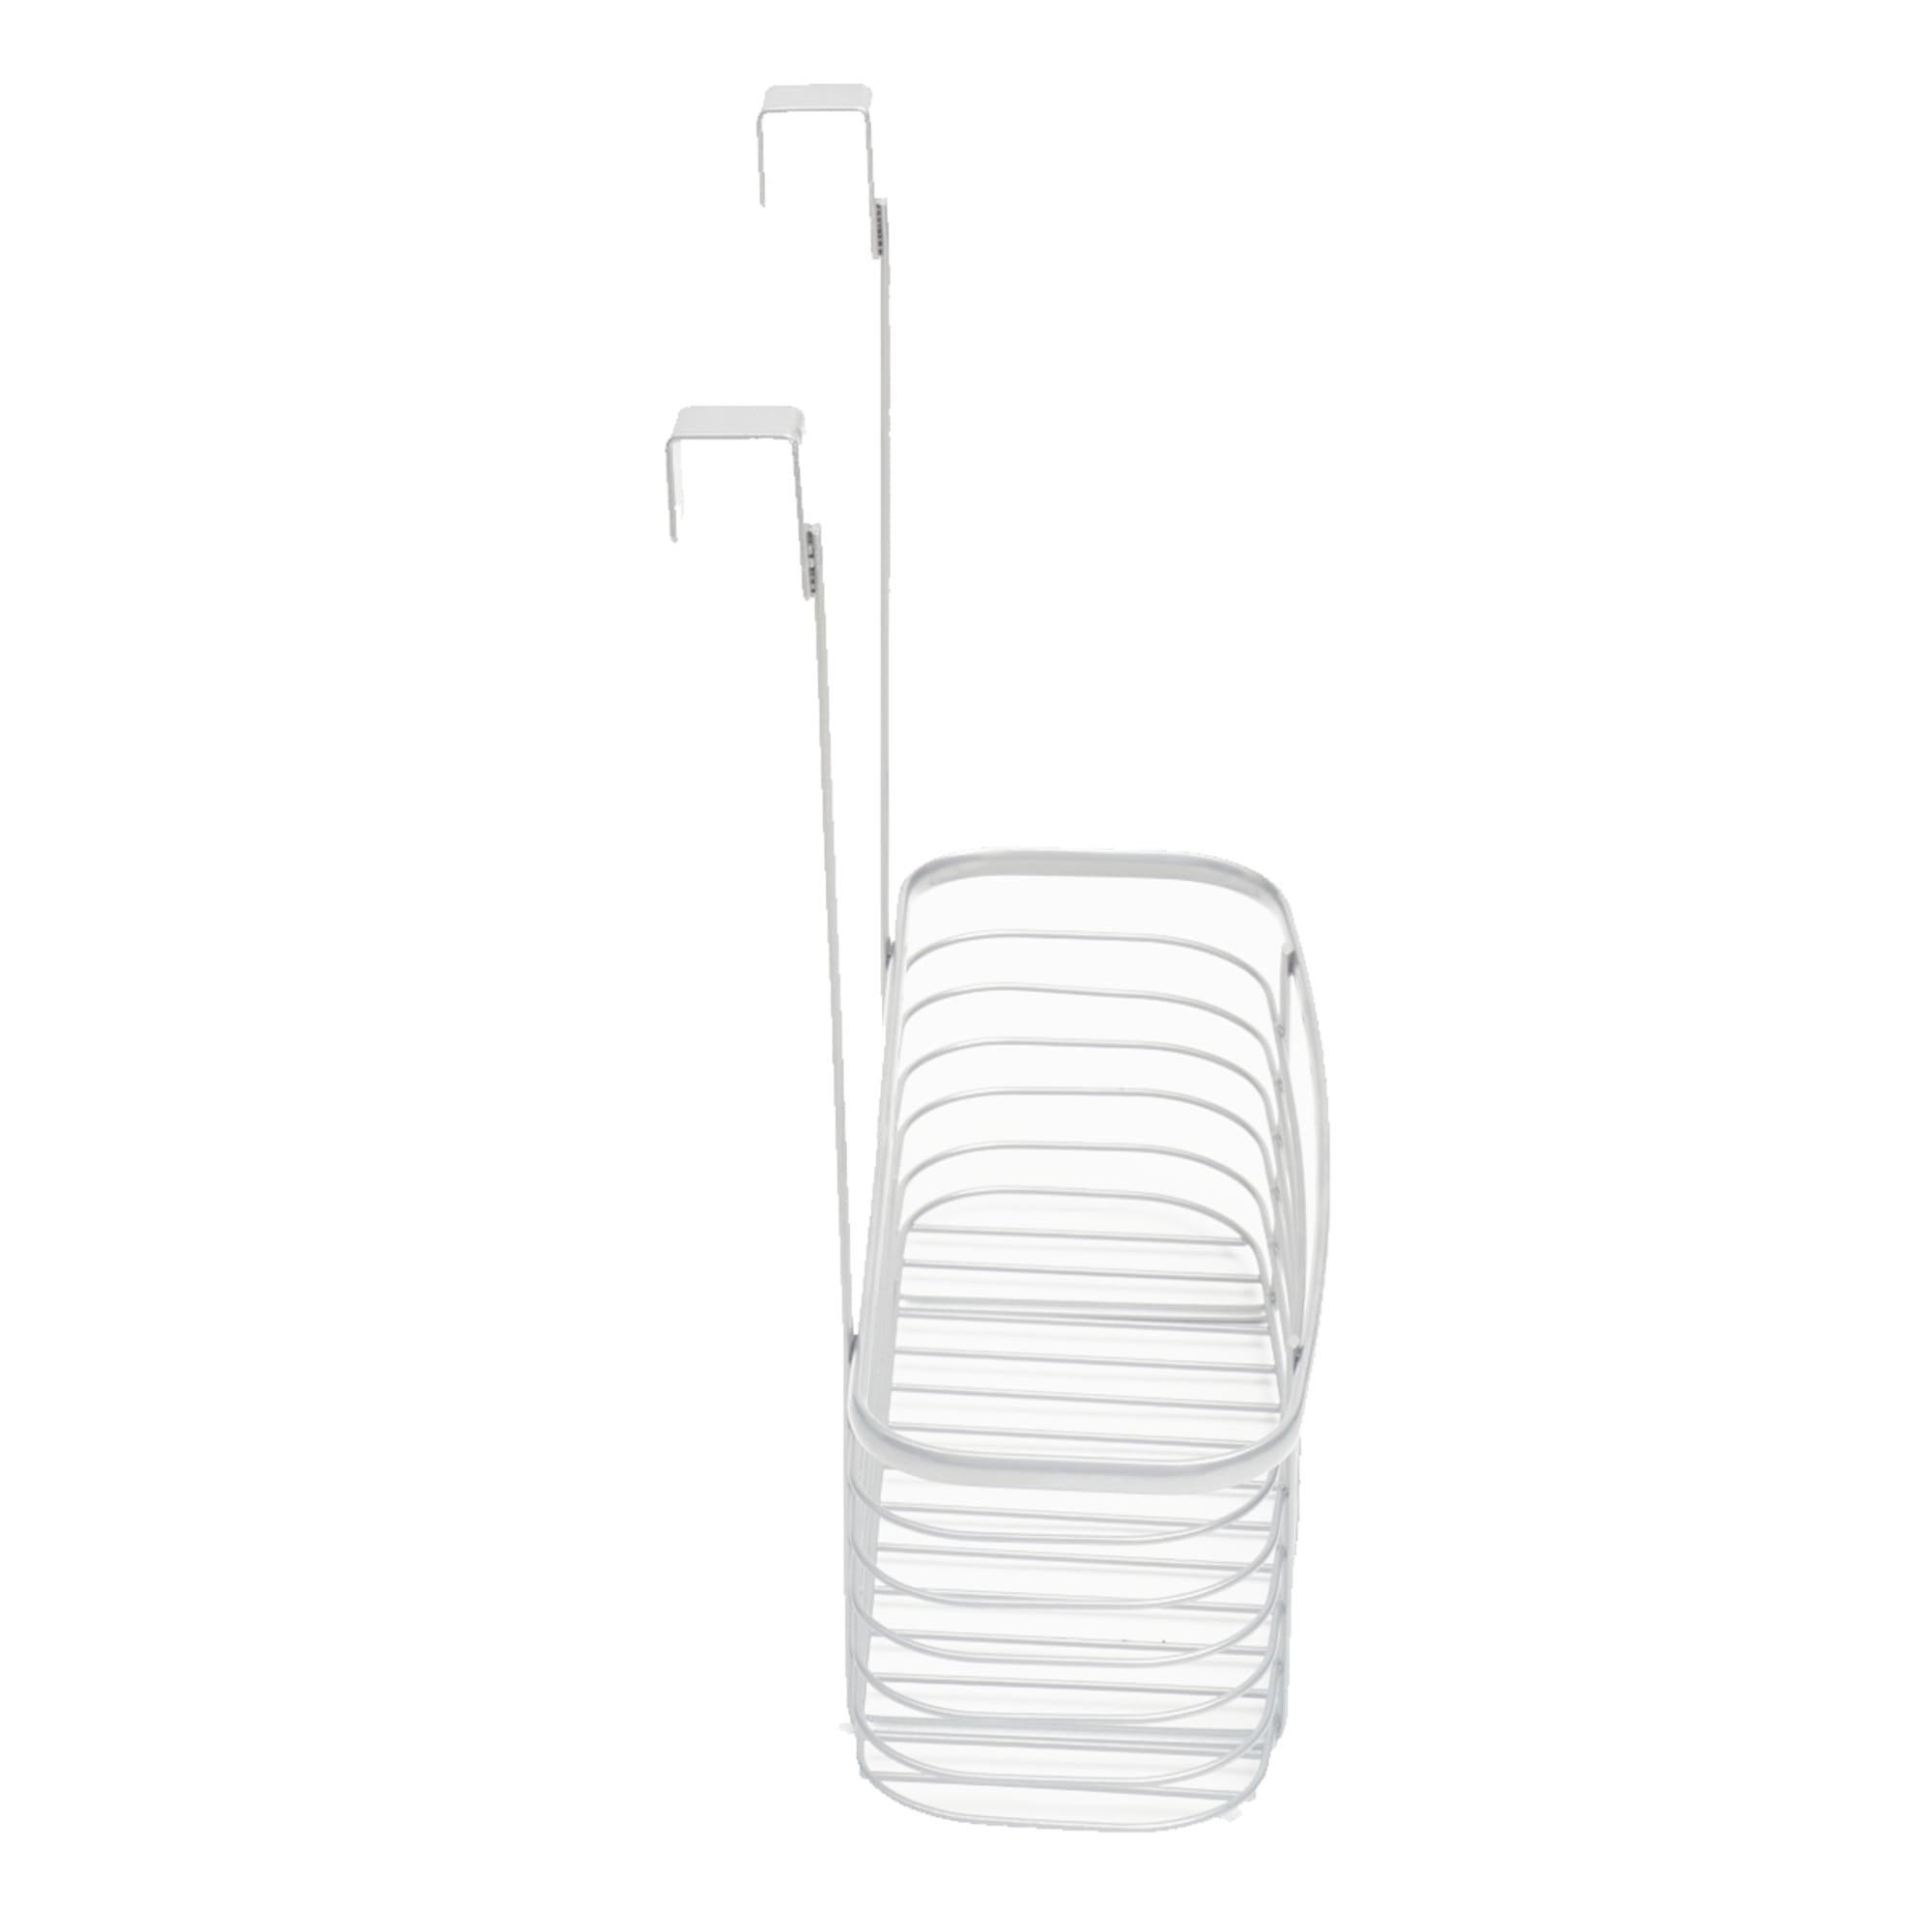 Home Basics Delta Steel Over the Cabinet Basket, Silver $6.00 EACH, CASE PACK OF 12